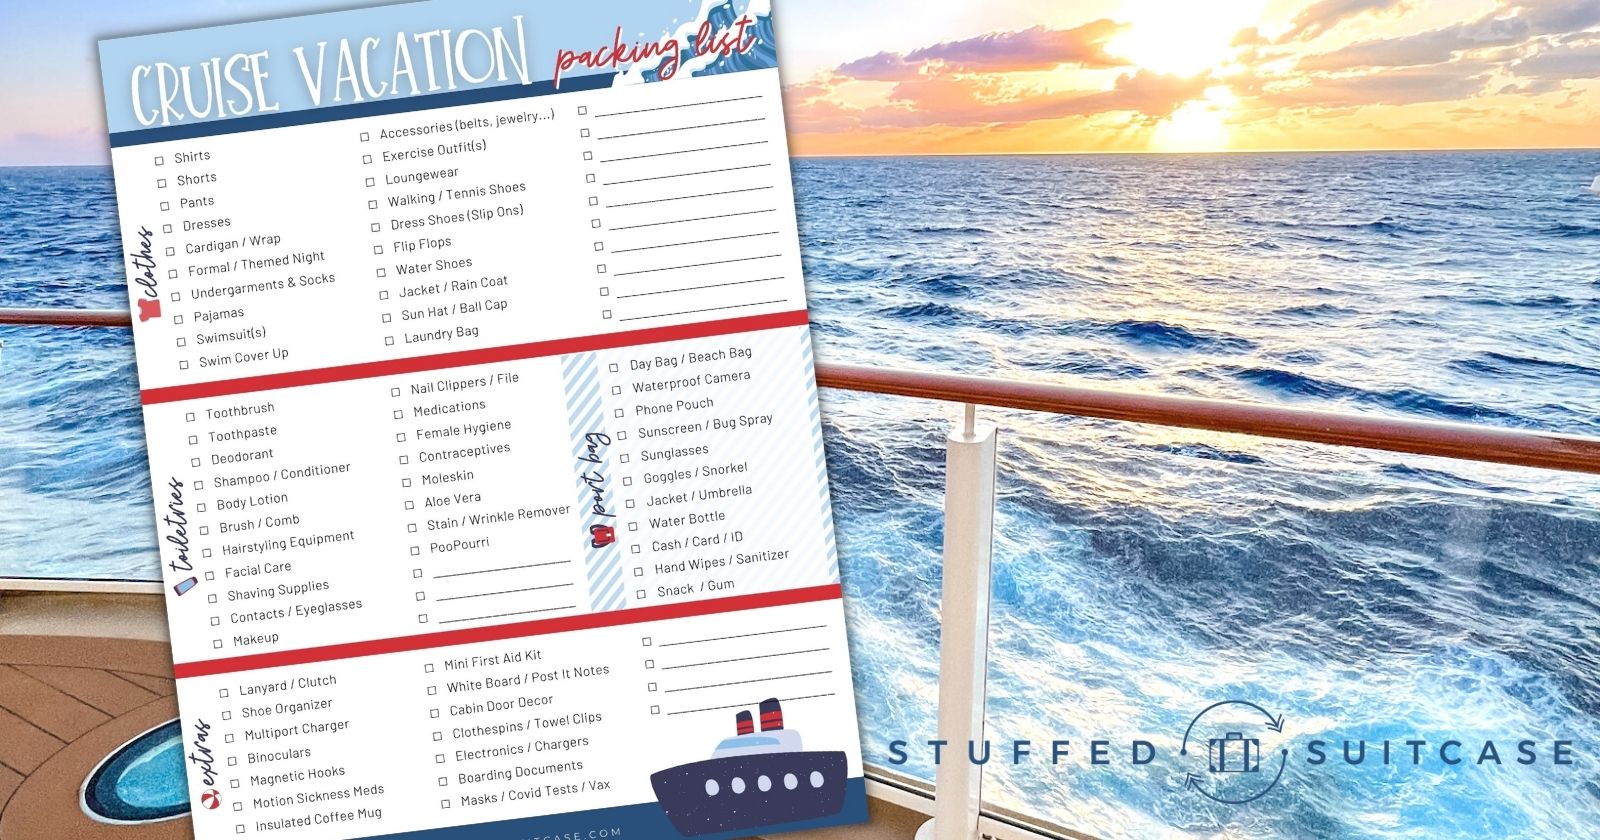 printable cruise packing list overlay over cruise ship deck with sunset over the ocean horizon